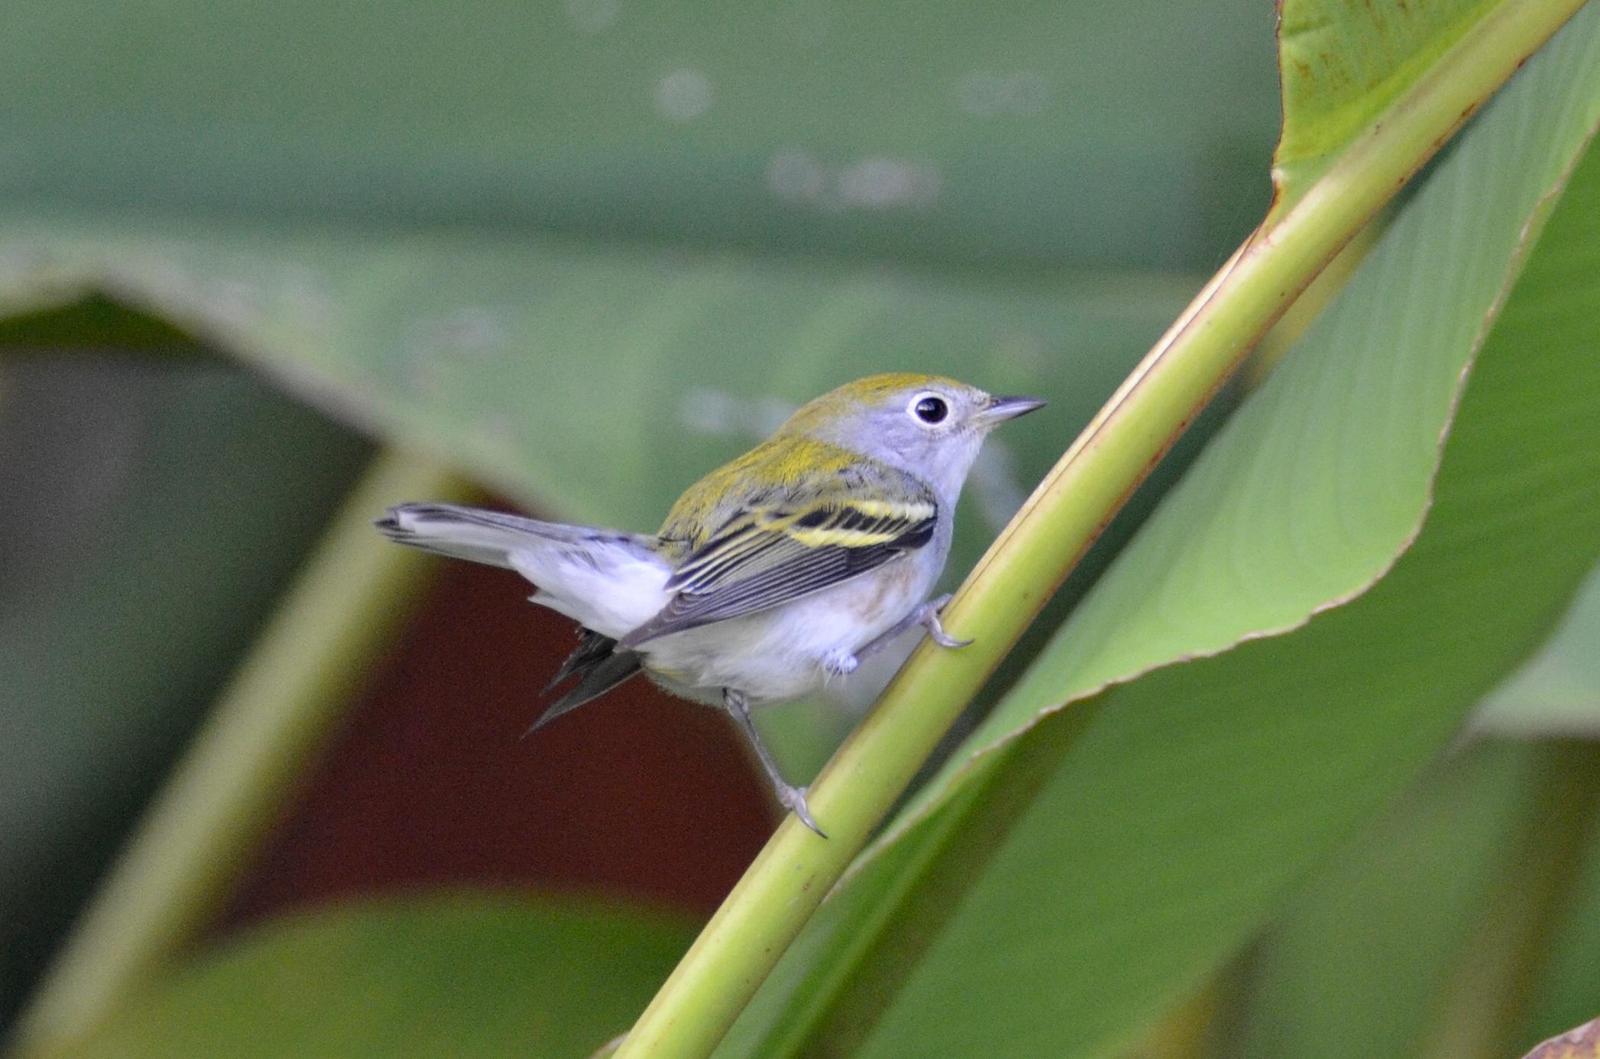 Chestnut-sided Warbler Photo by Paula Duenas